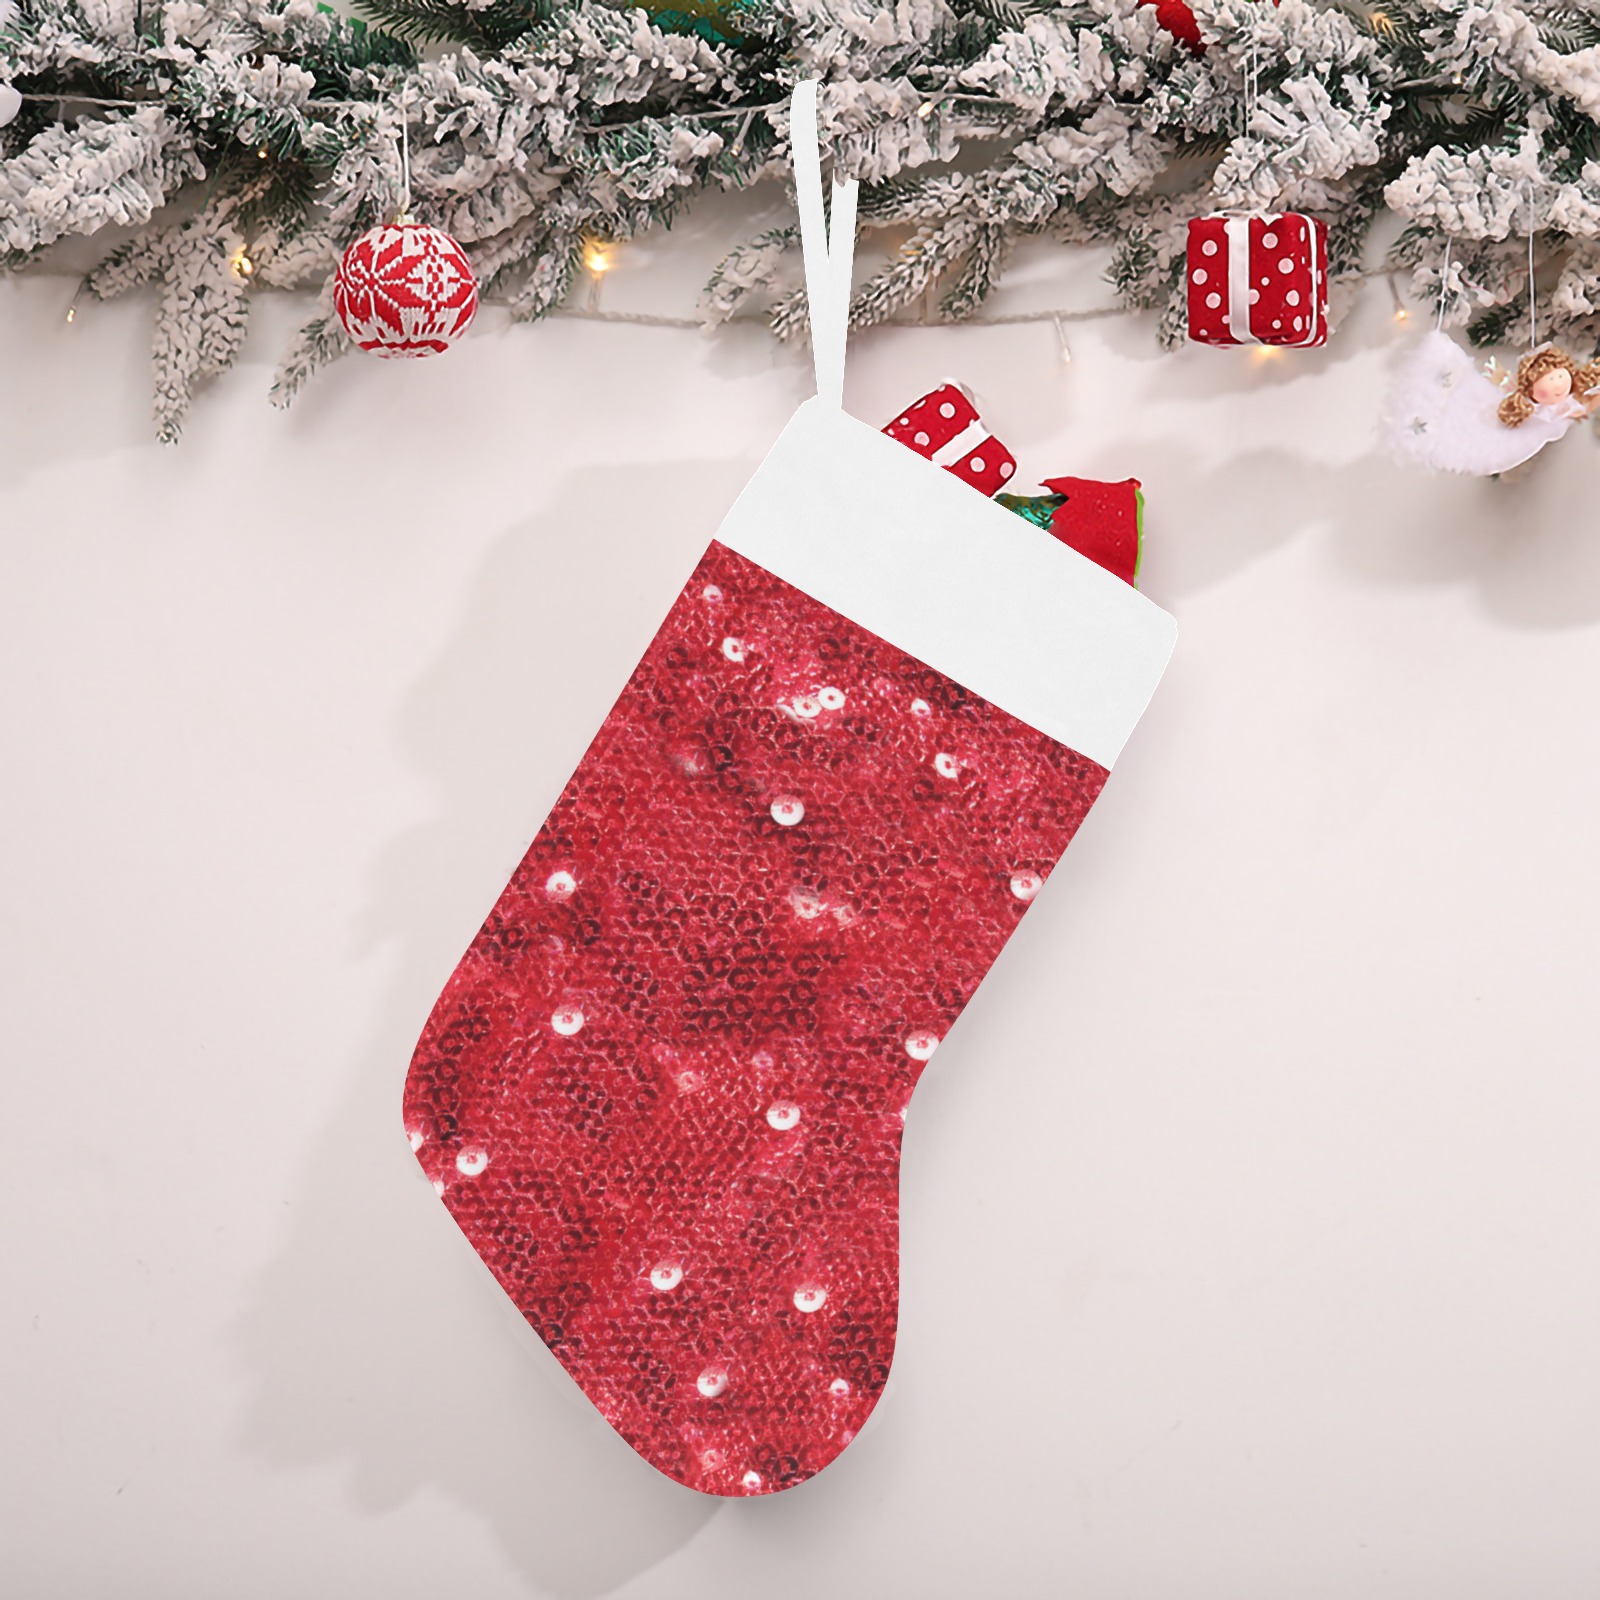 Sparkling Sequin - Look Christmas Stocking